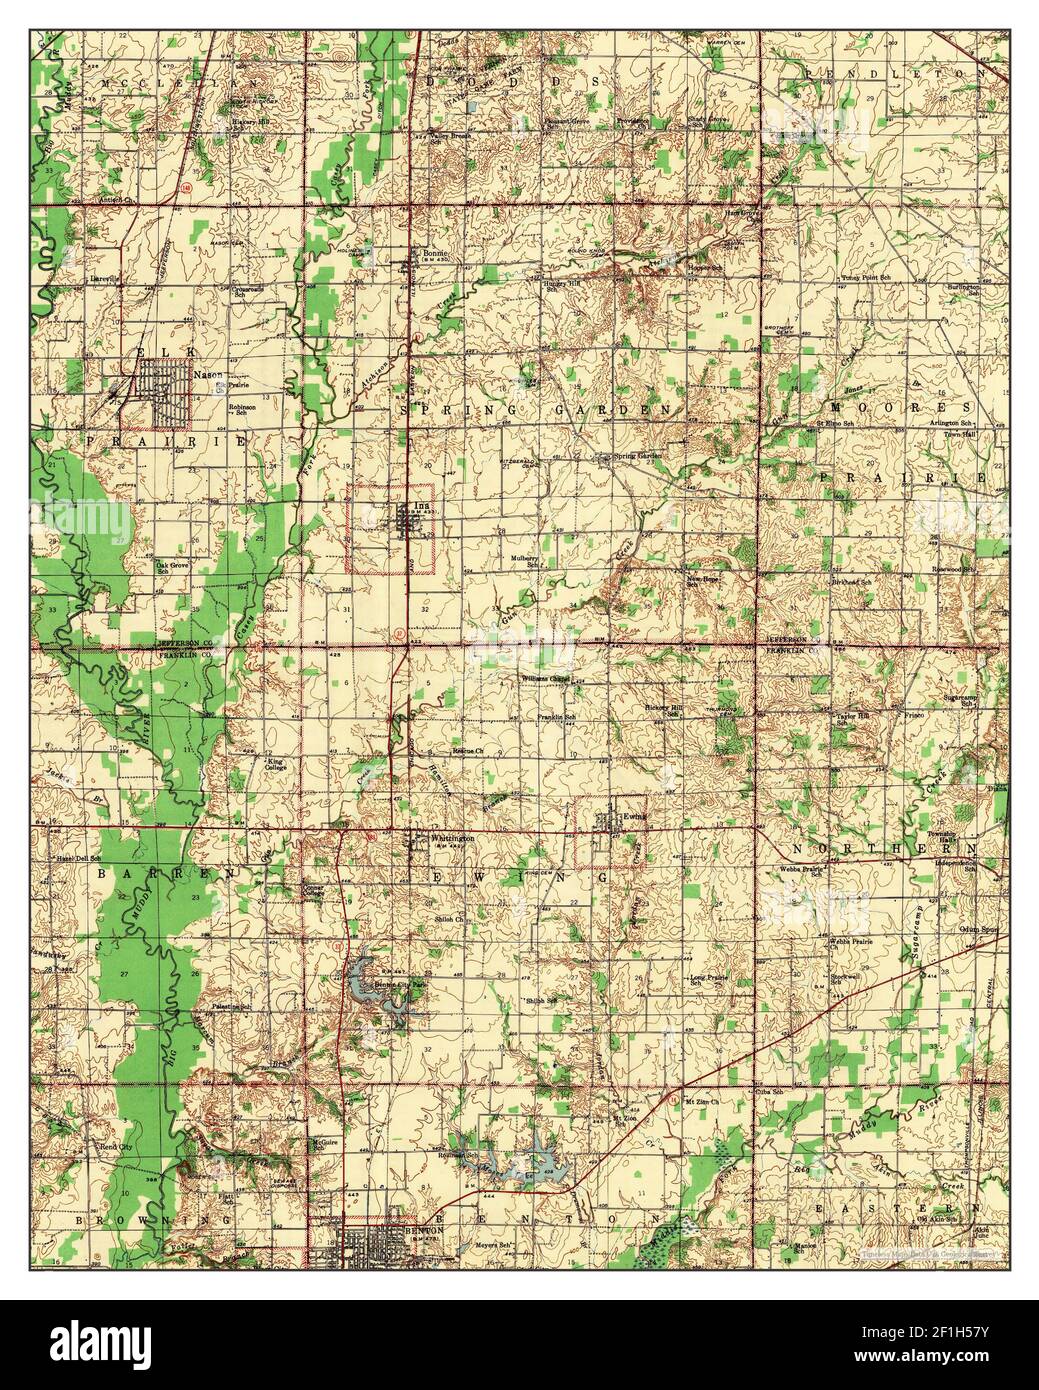 Ina, Illinois, map 1943, 1:62500, United States of America by Timeless Maps, data U.S. Geological Survey Stock Photo